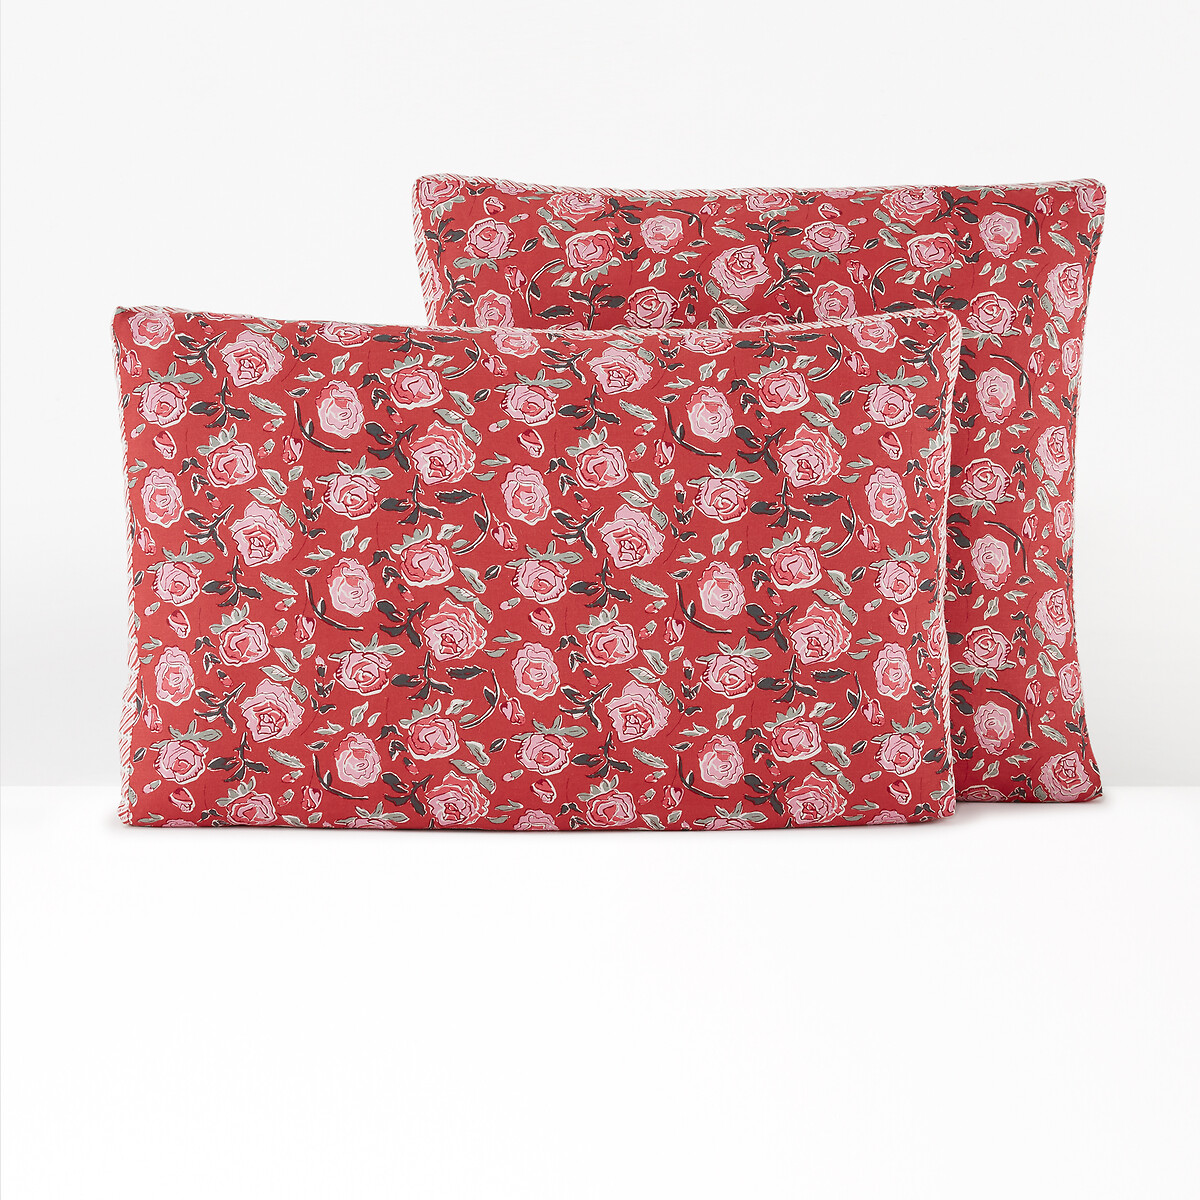 Paolisi Floral Washed Cotton/Linen Pillowcase